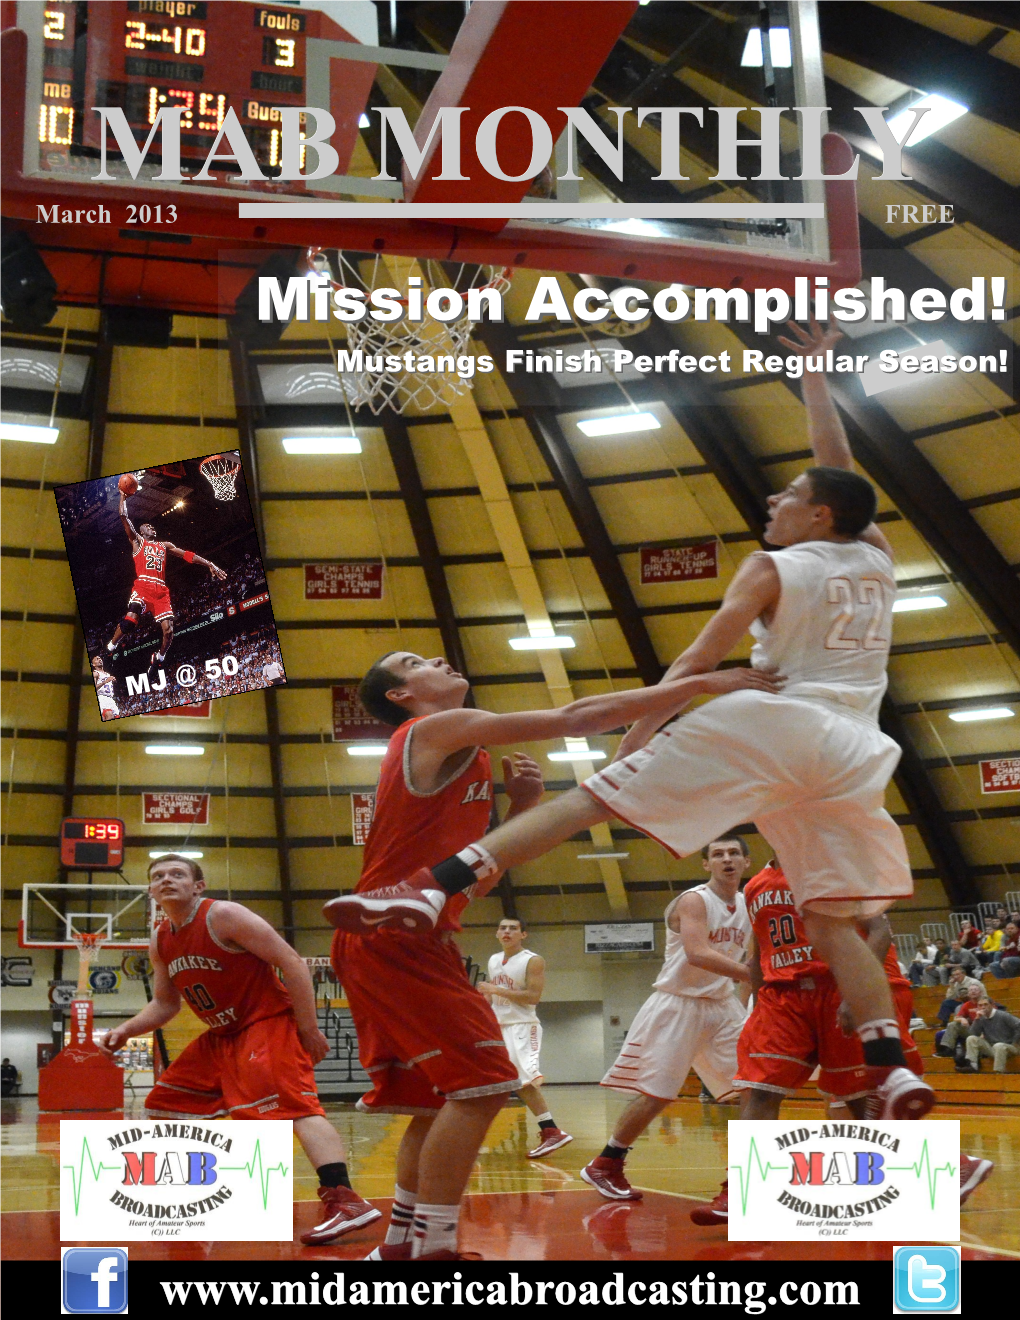 MAB MONTHLY March 2013 FREE Missionmission Accomplished!Accomplished! Mustangs Finish Perfect Regular Season! Mustangs Finish Perfect Regular Season